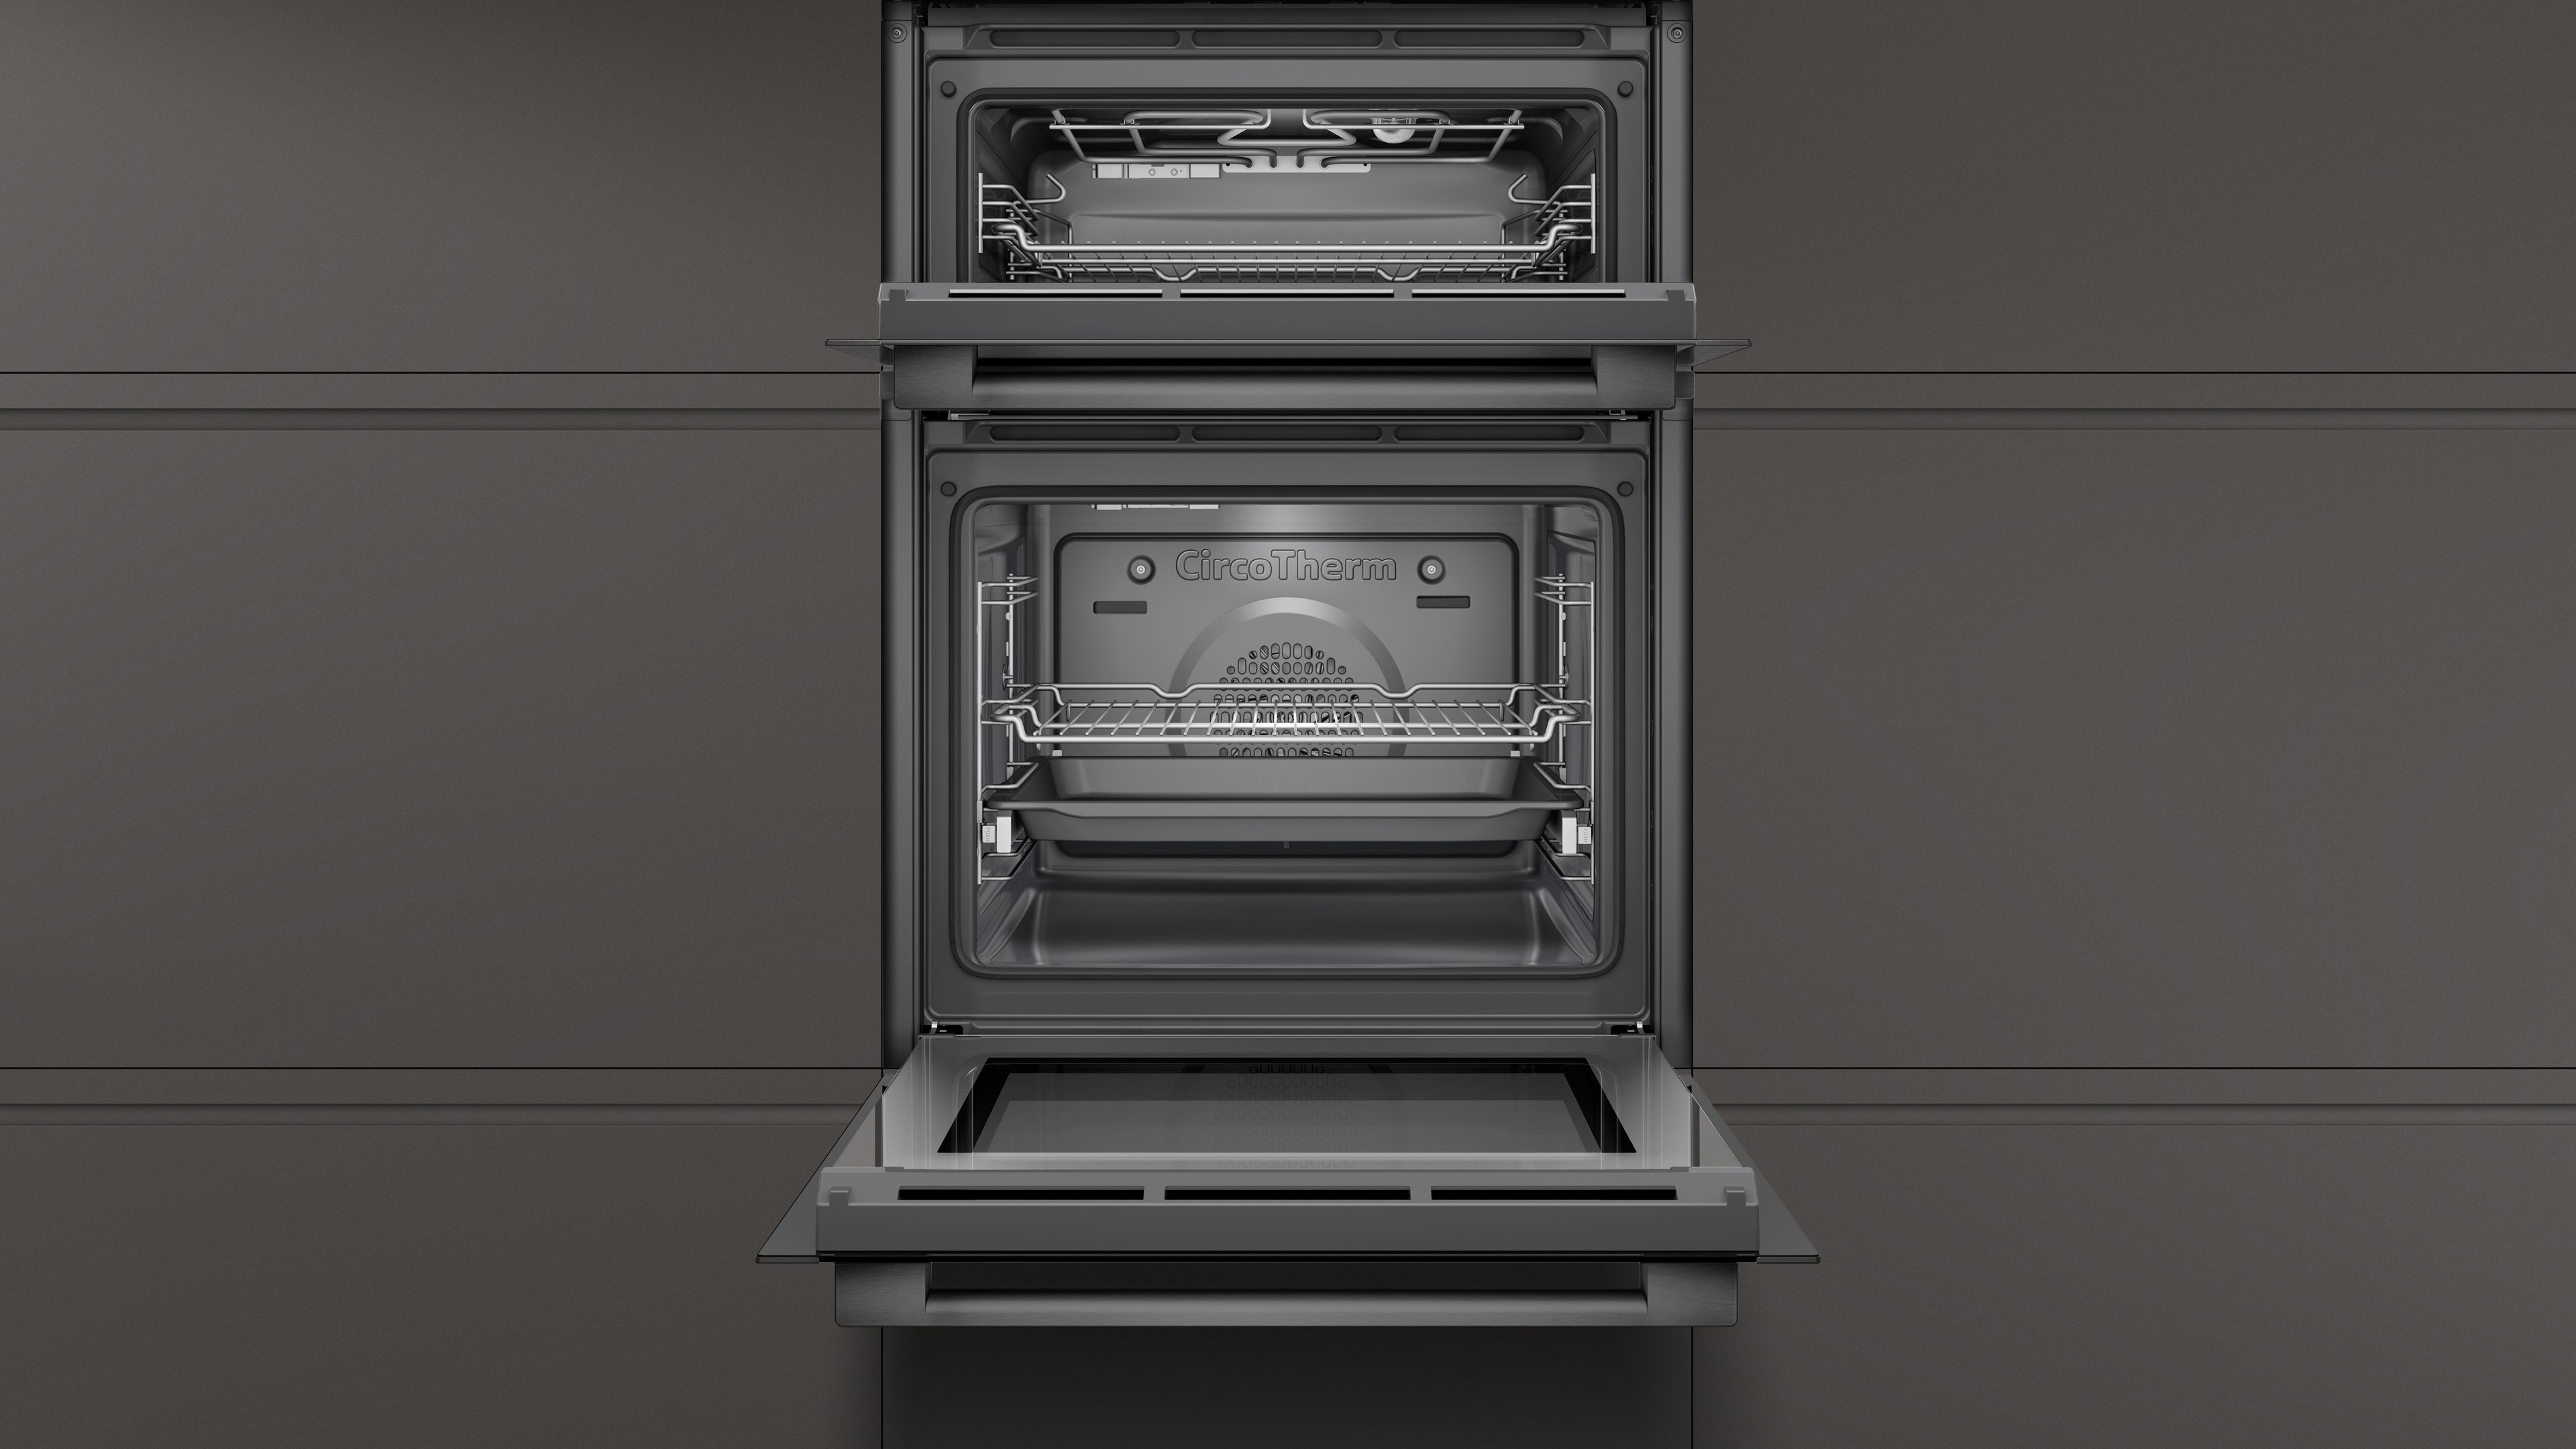 NEFF U1ACE2HG0B Built-in Dual fuel Double oven - Black